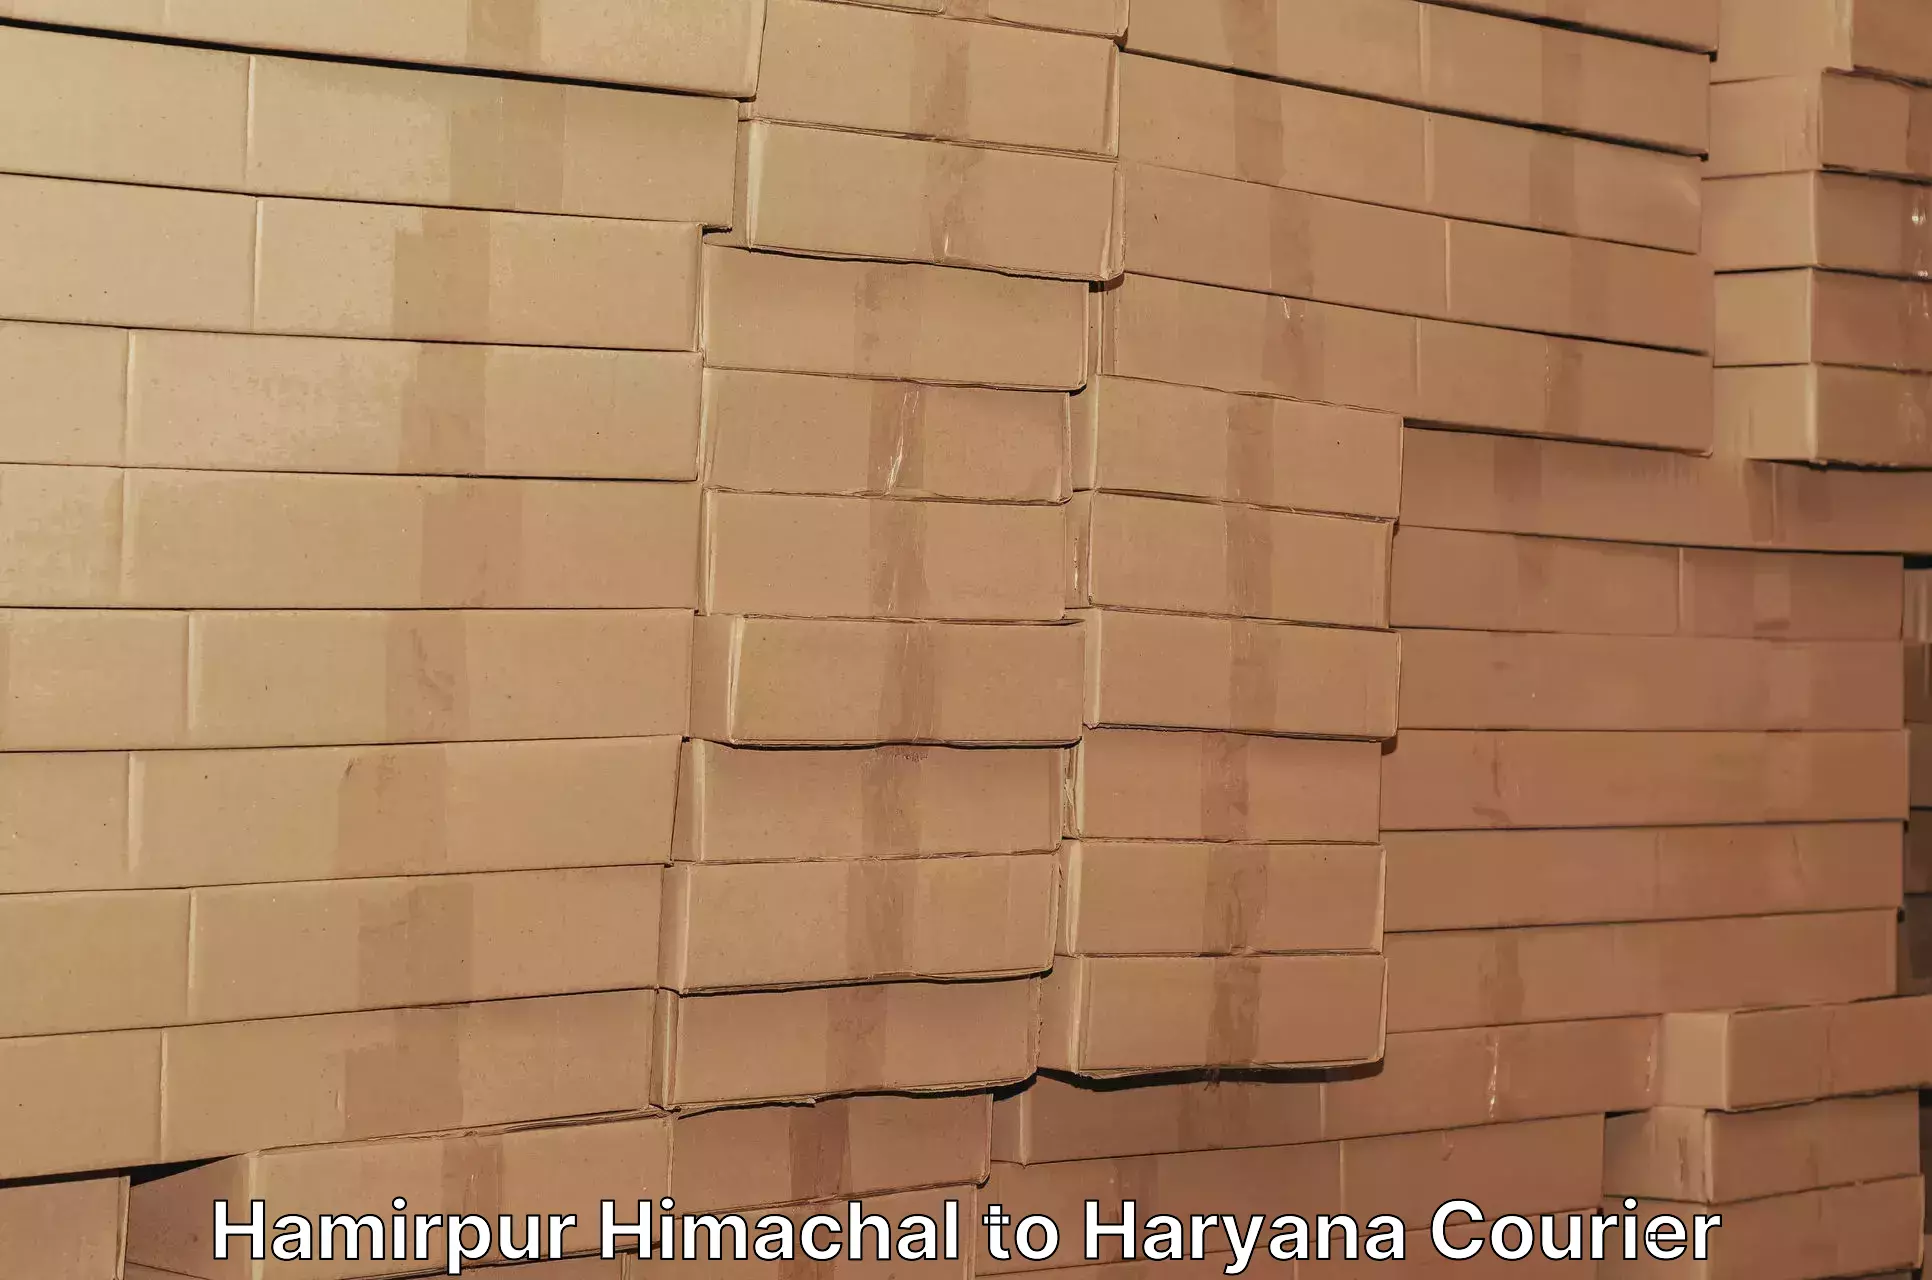 Efficient parcel tracking Hamirpur Himachal to Siwani